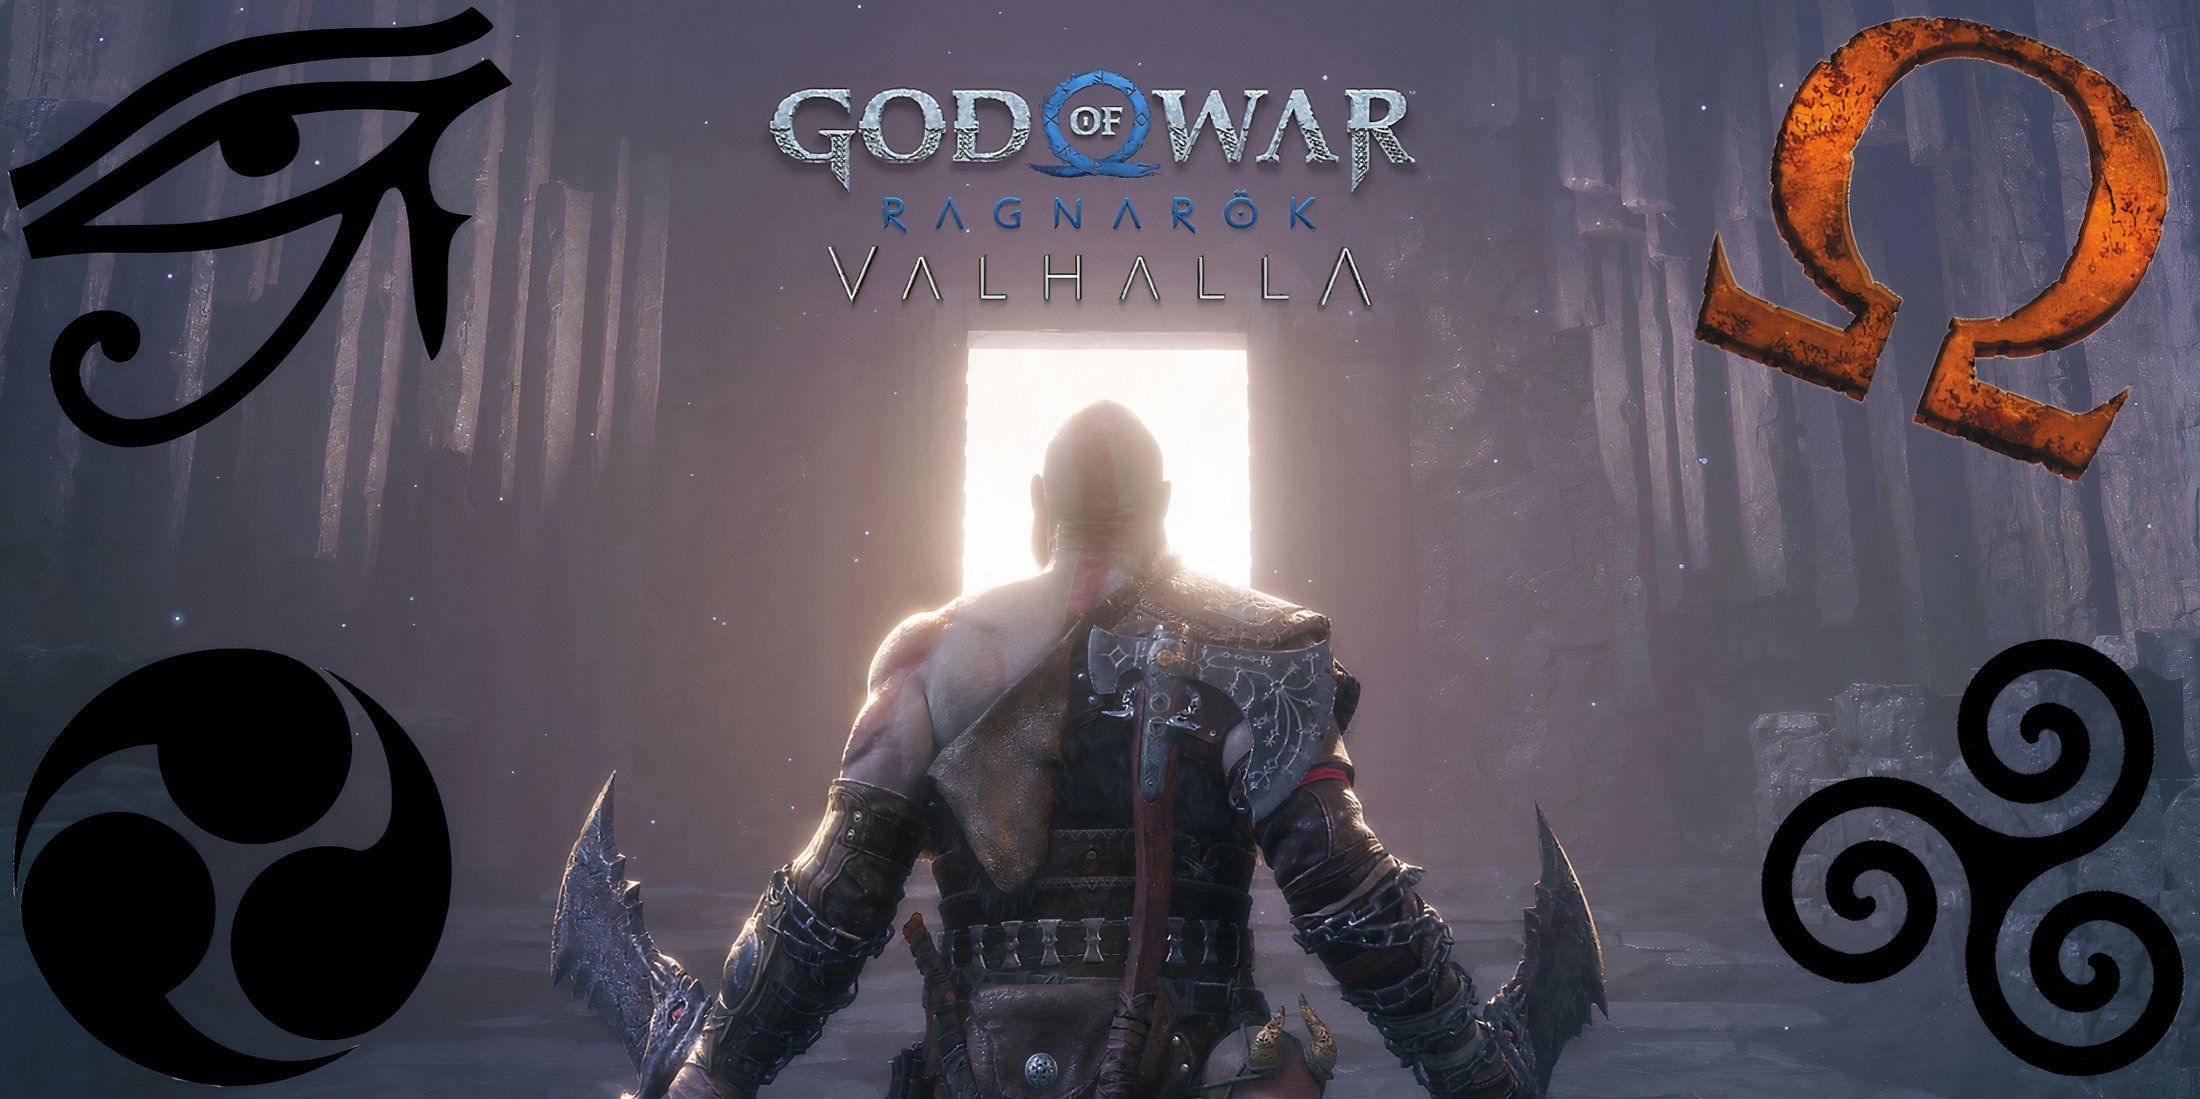 God of War Ragnarok Valhalla is a Good Sign That The Norse Era Won’t Be Abandoned Completely (1)